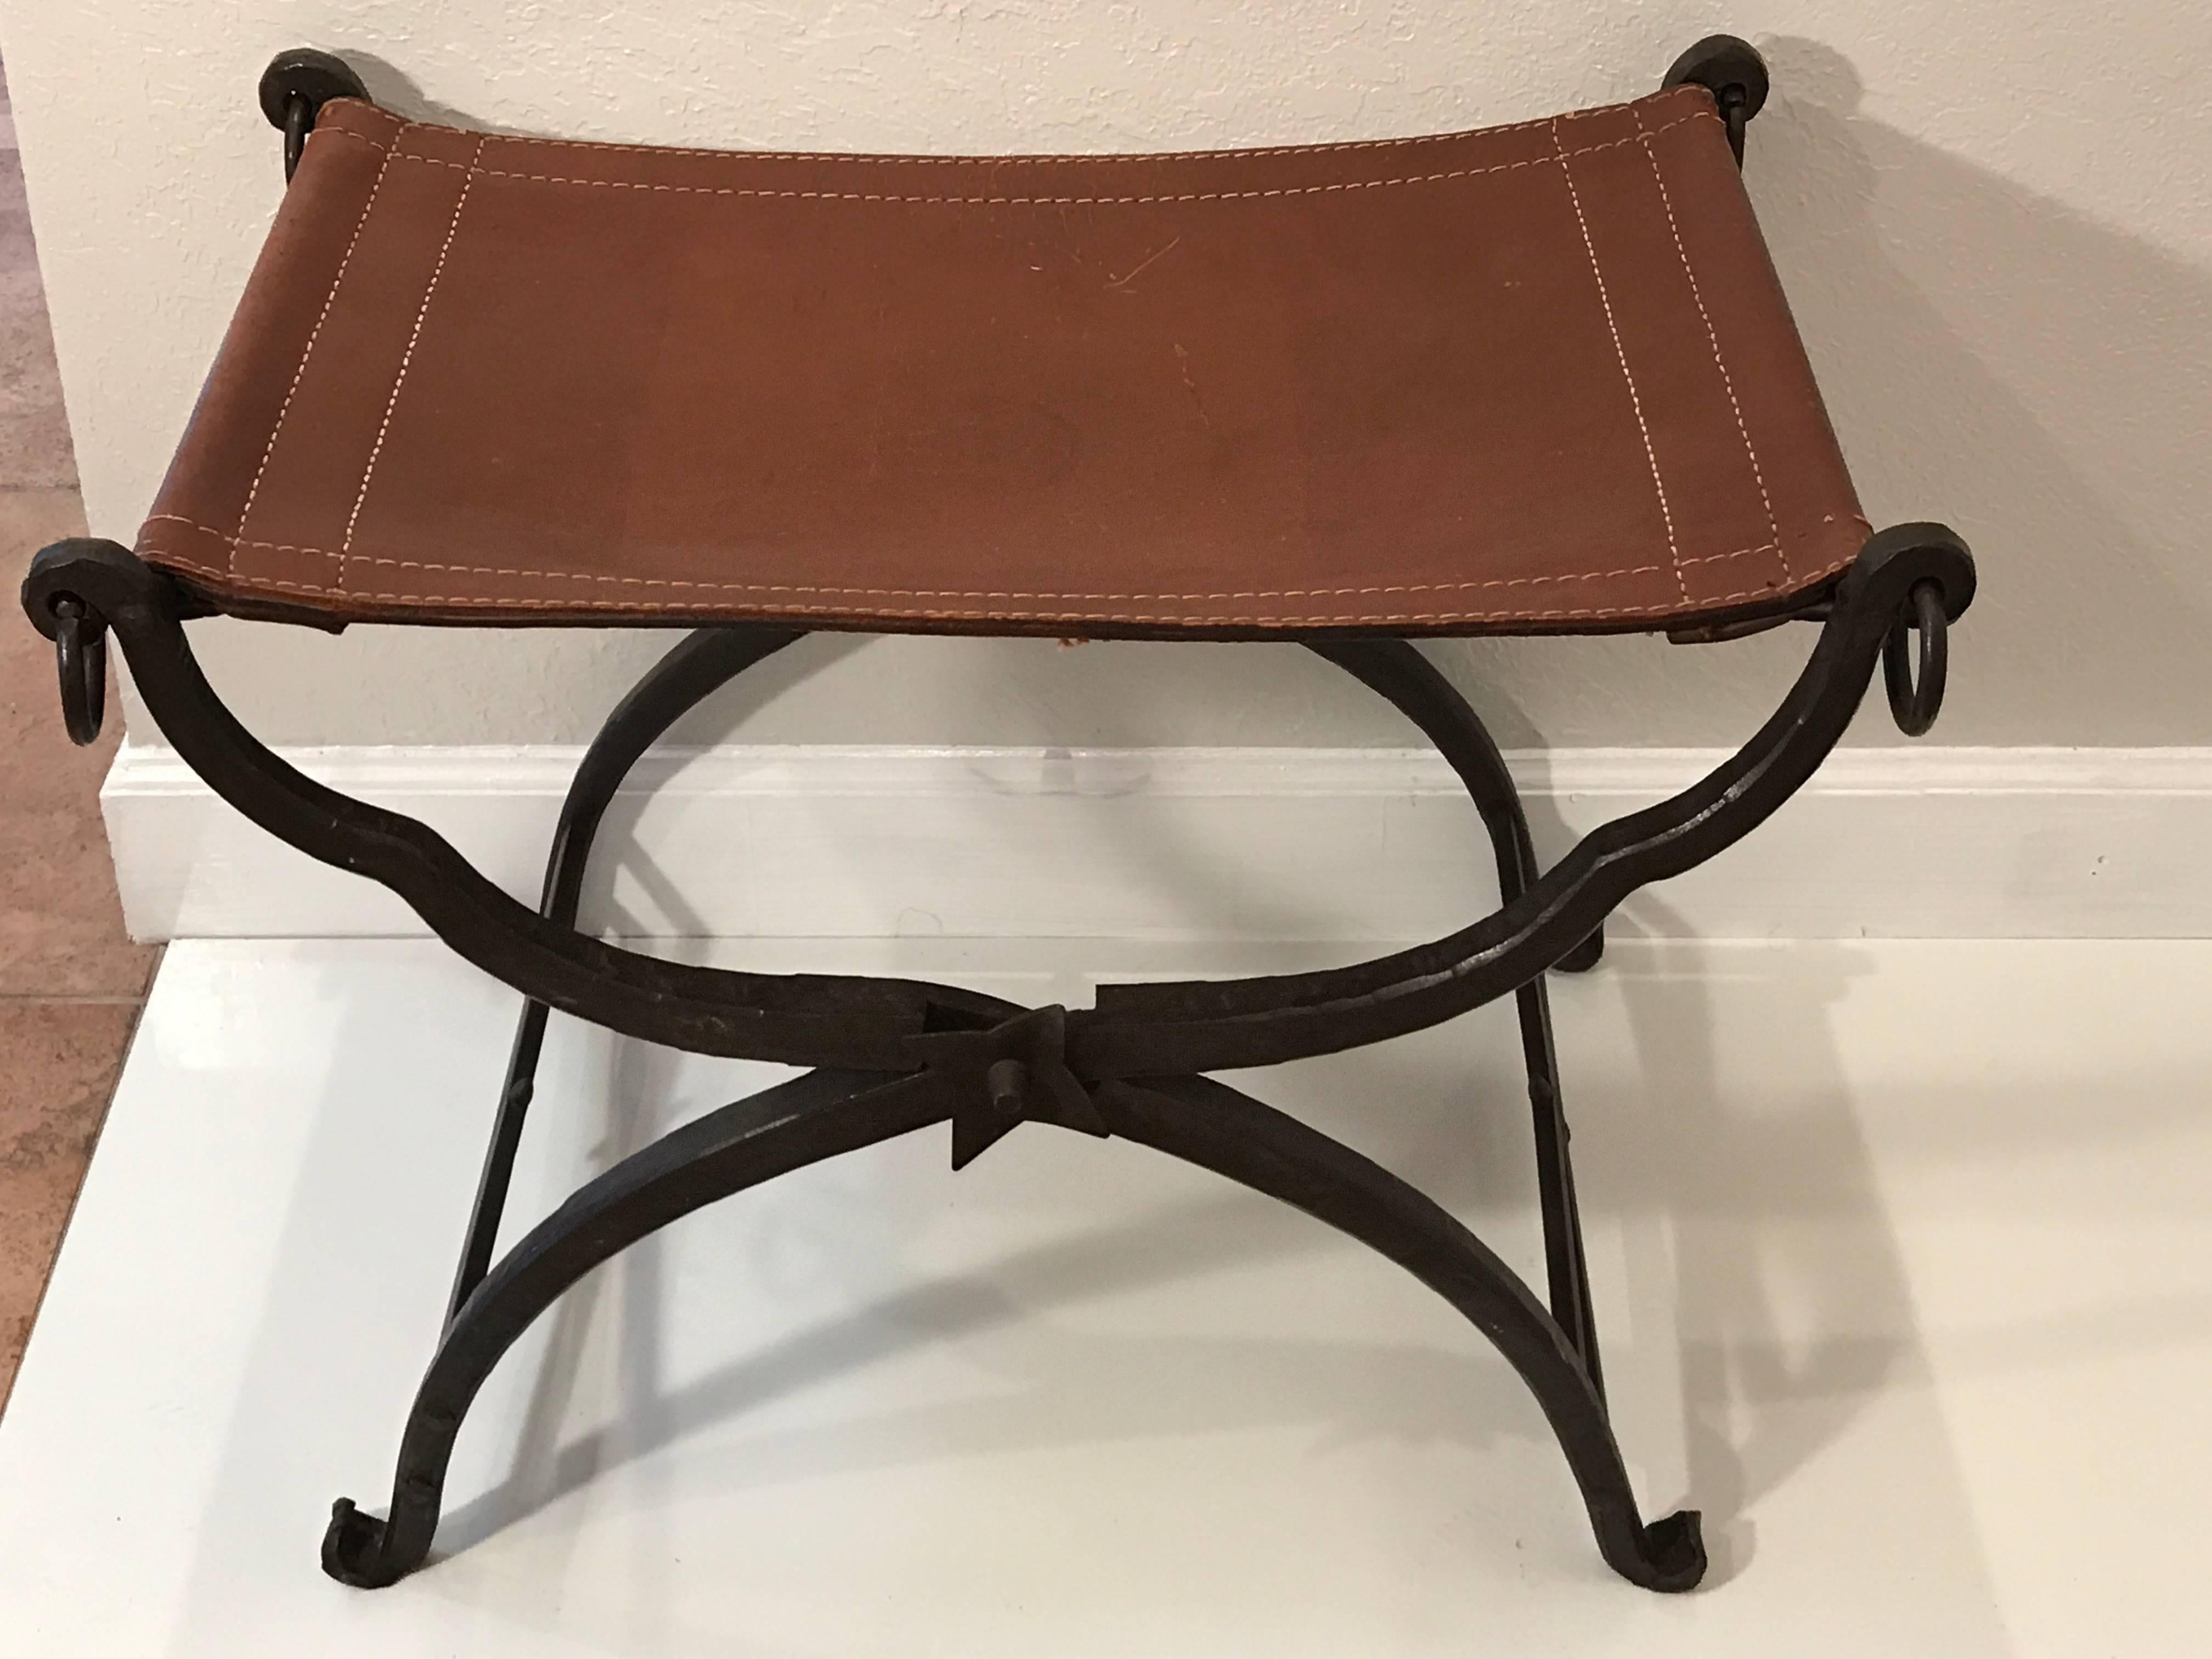 Iron and leather curule bench, beautiful forged iron and nicely patinated leather seat. The bench does fold.